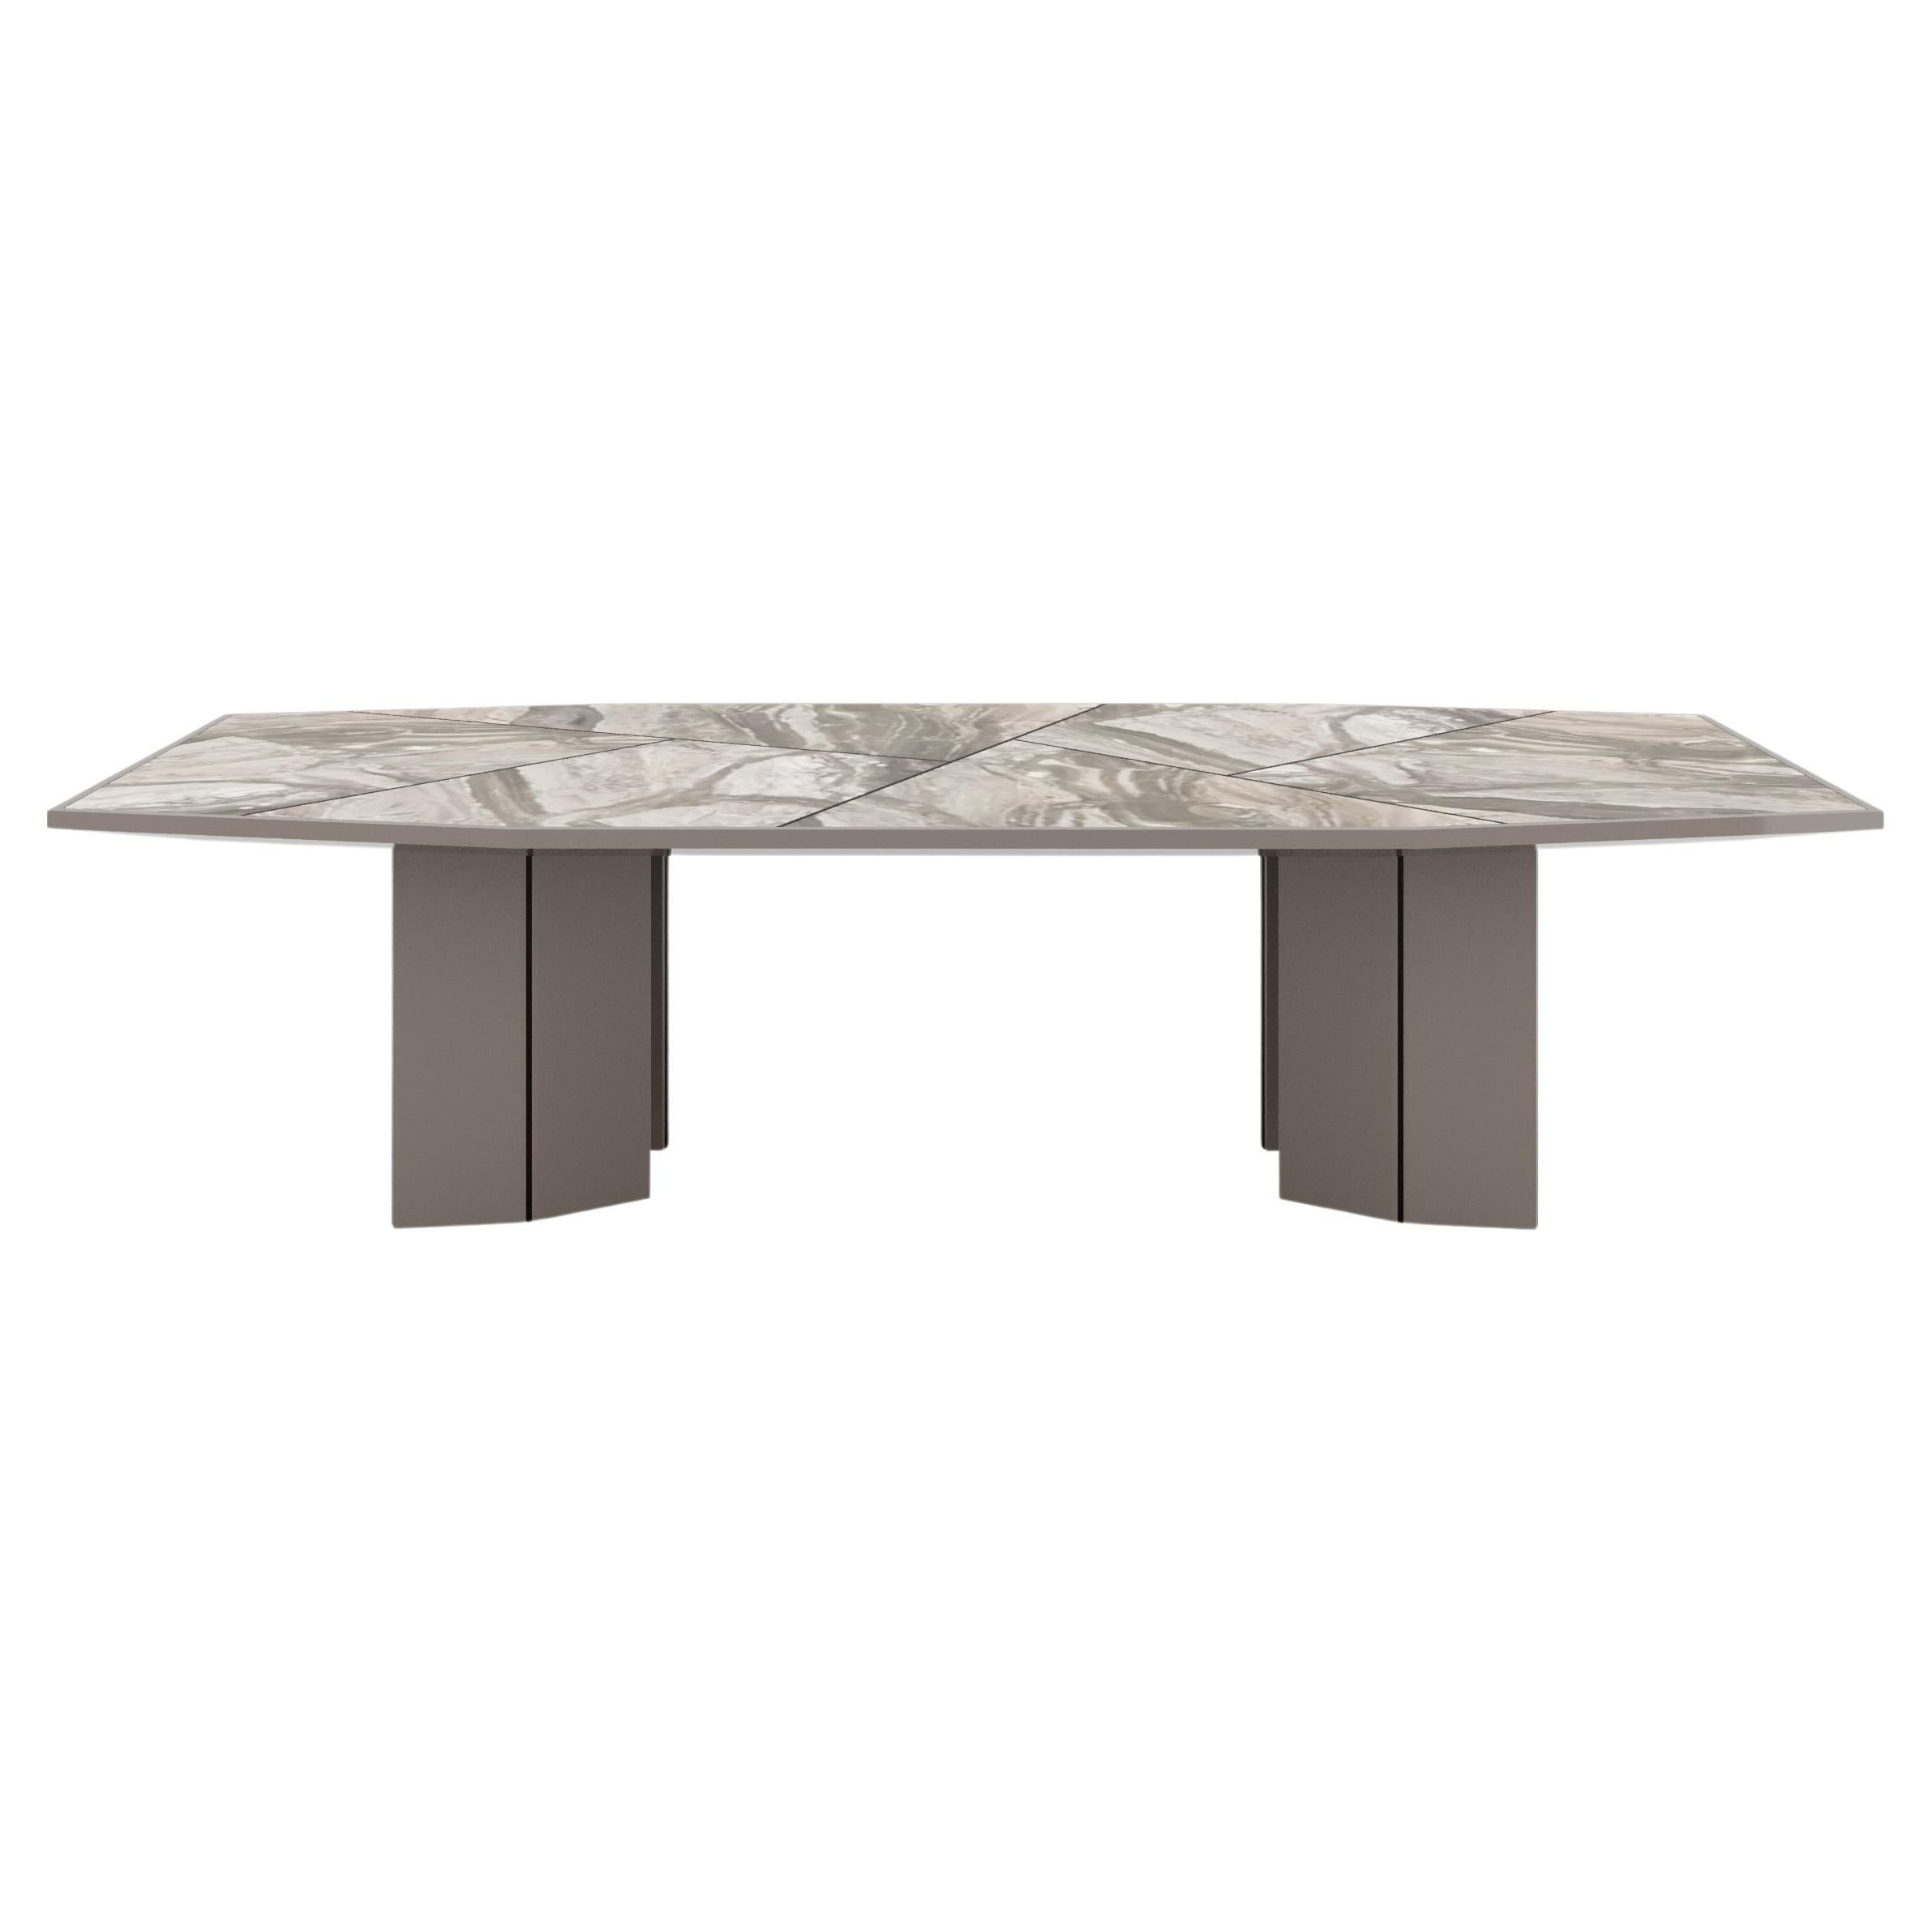 LORCA Table with Ceramic Top For Sale